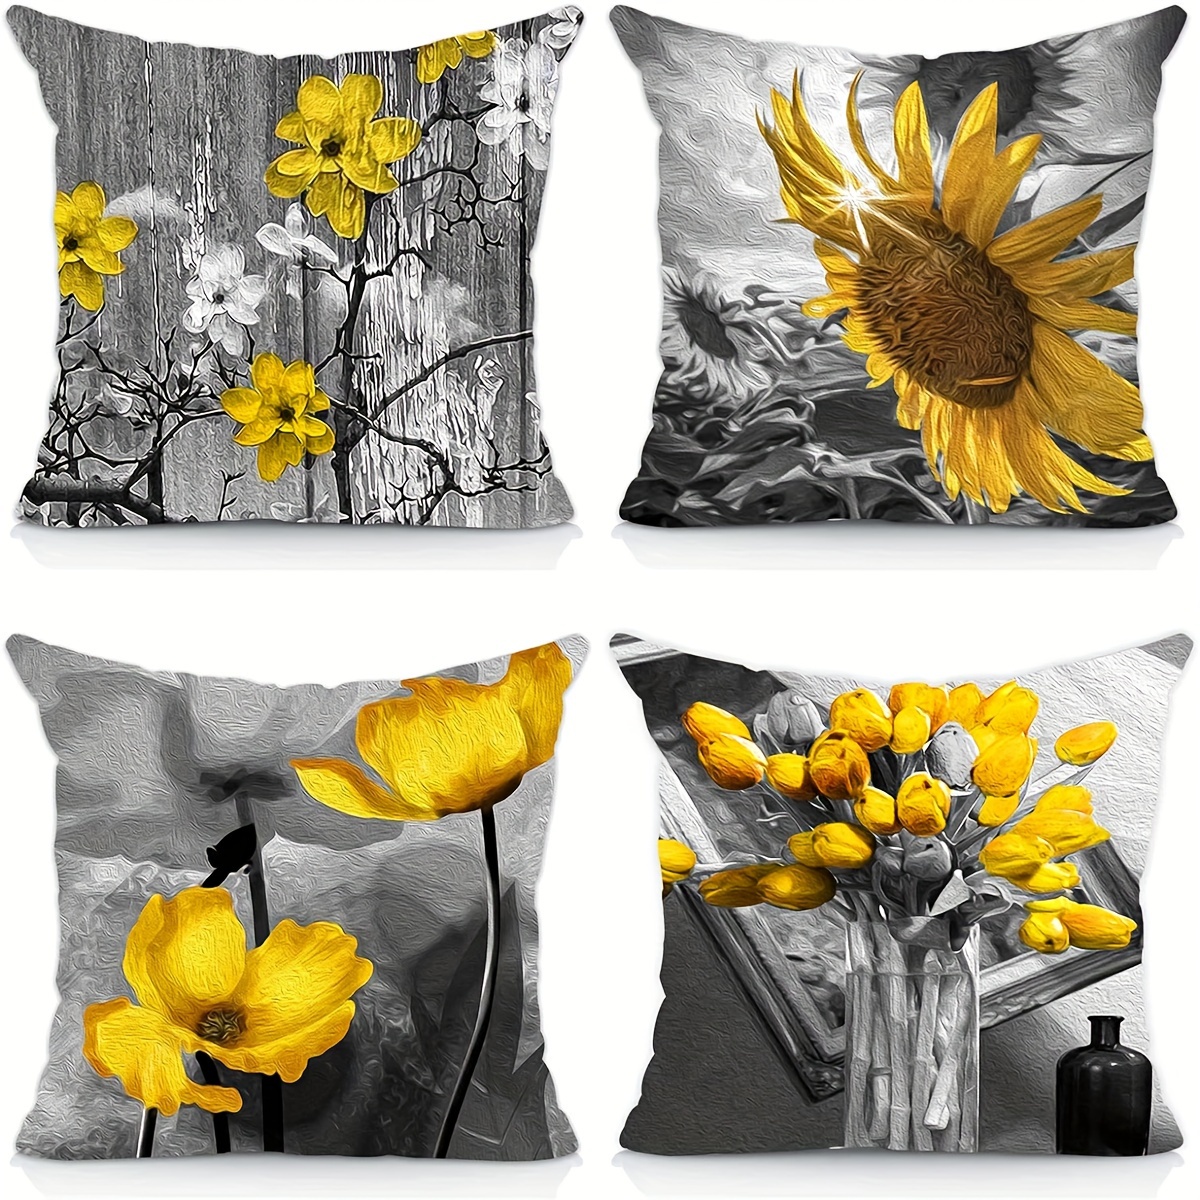 

4pcs, Set Of Sunflower Pillowcases, Home Sofa Backrest Cushions, Sunflower Office Sofa Chairs, Waist Pillows, And Pillow Decorations (excluding Pillow Core)